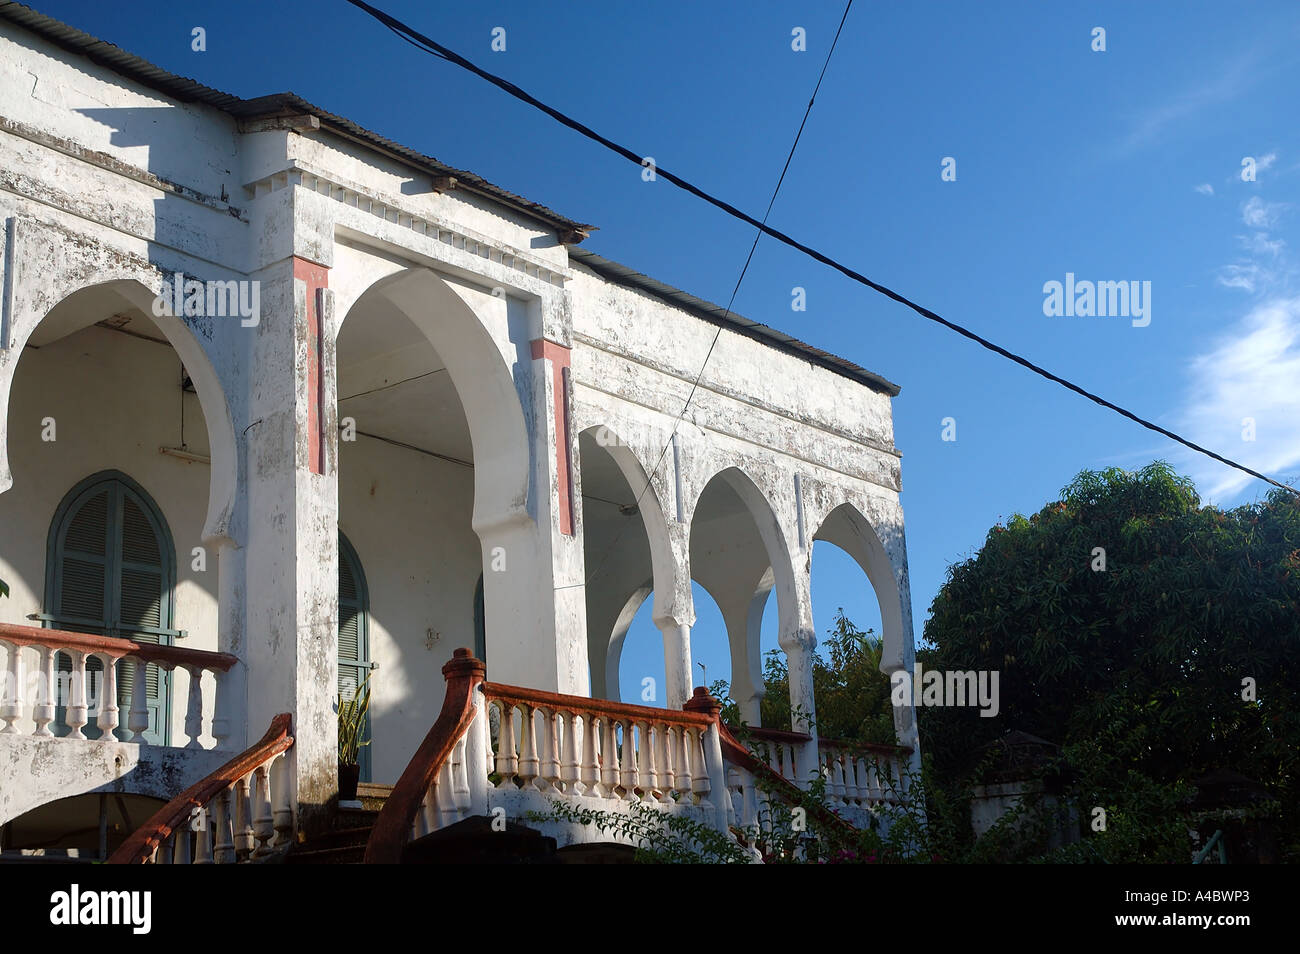 Stylish but crumbling old villa in the French colonial town of Tamatave Toamasina Madagascar Stock Photo